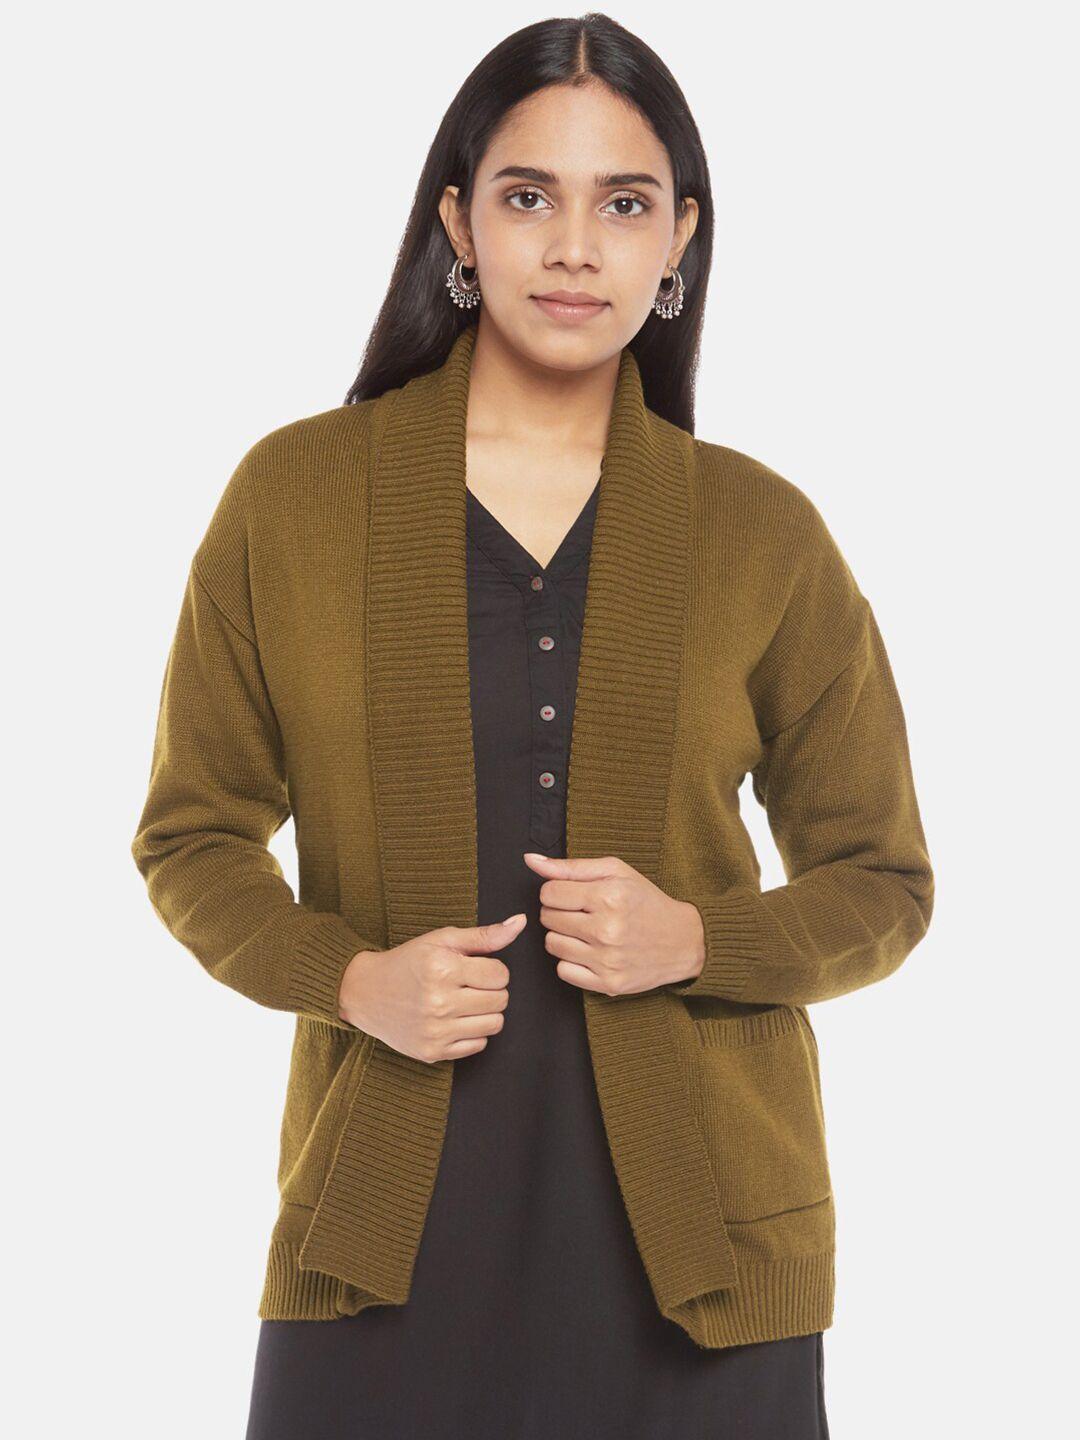 rangmanch by pantaloons women olive green front-open sweater